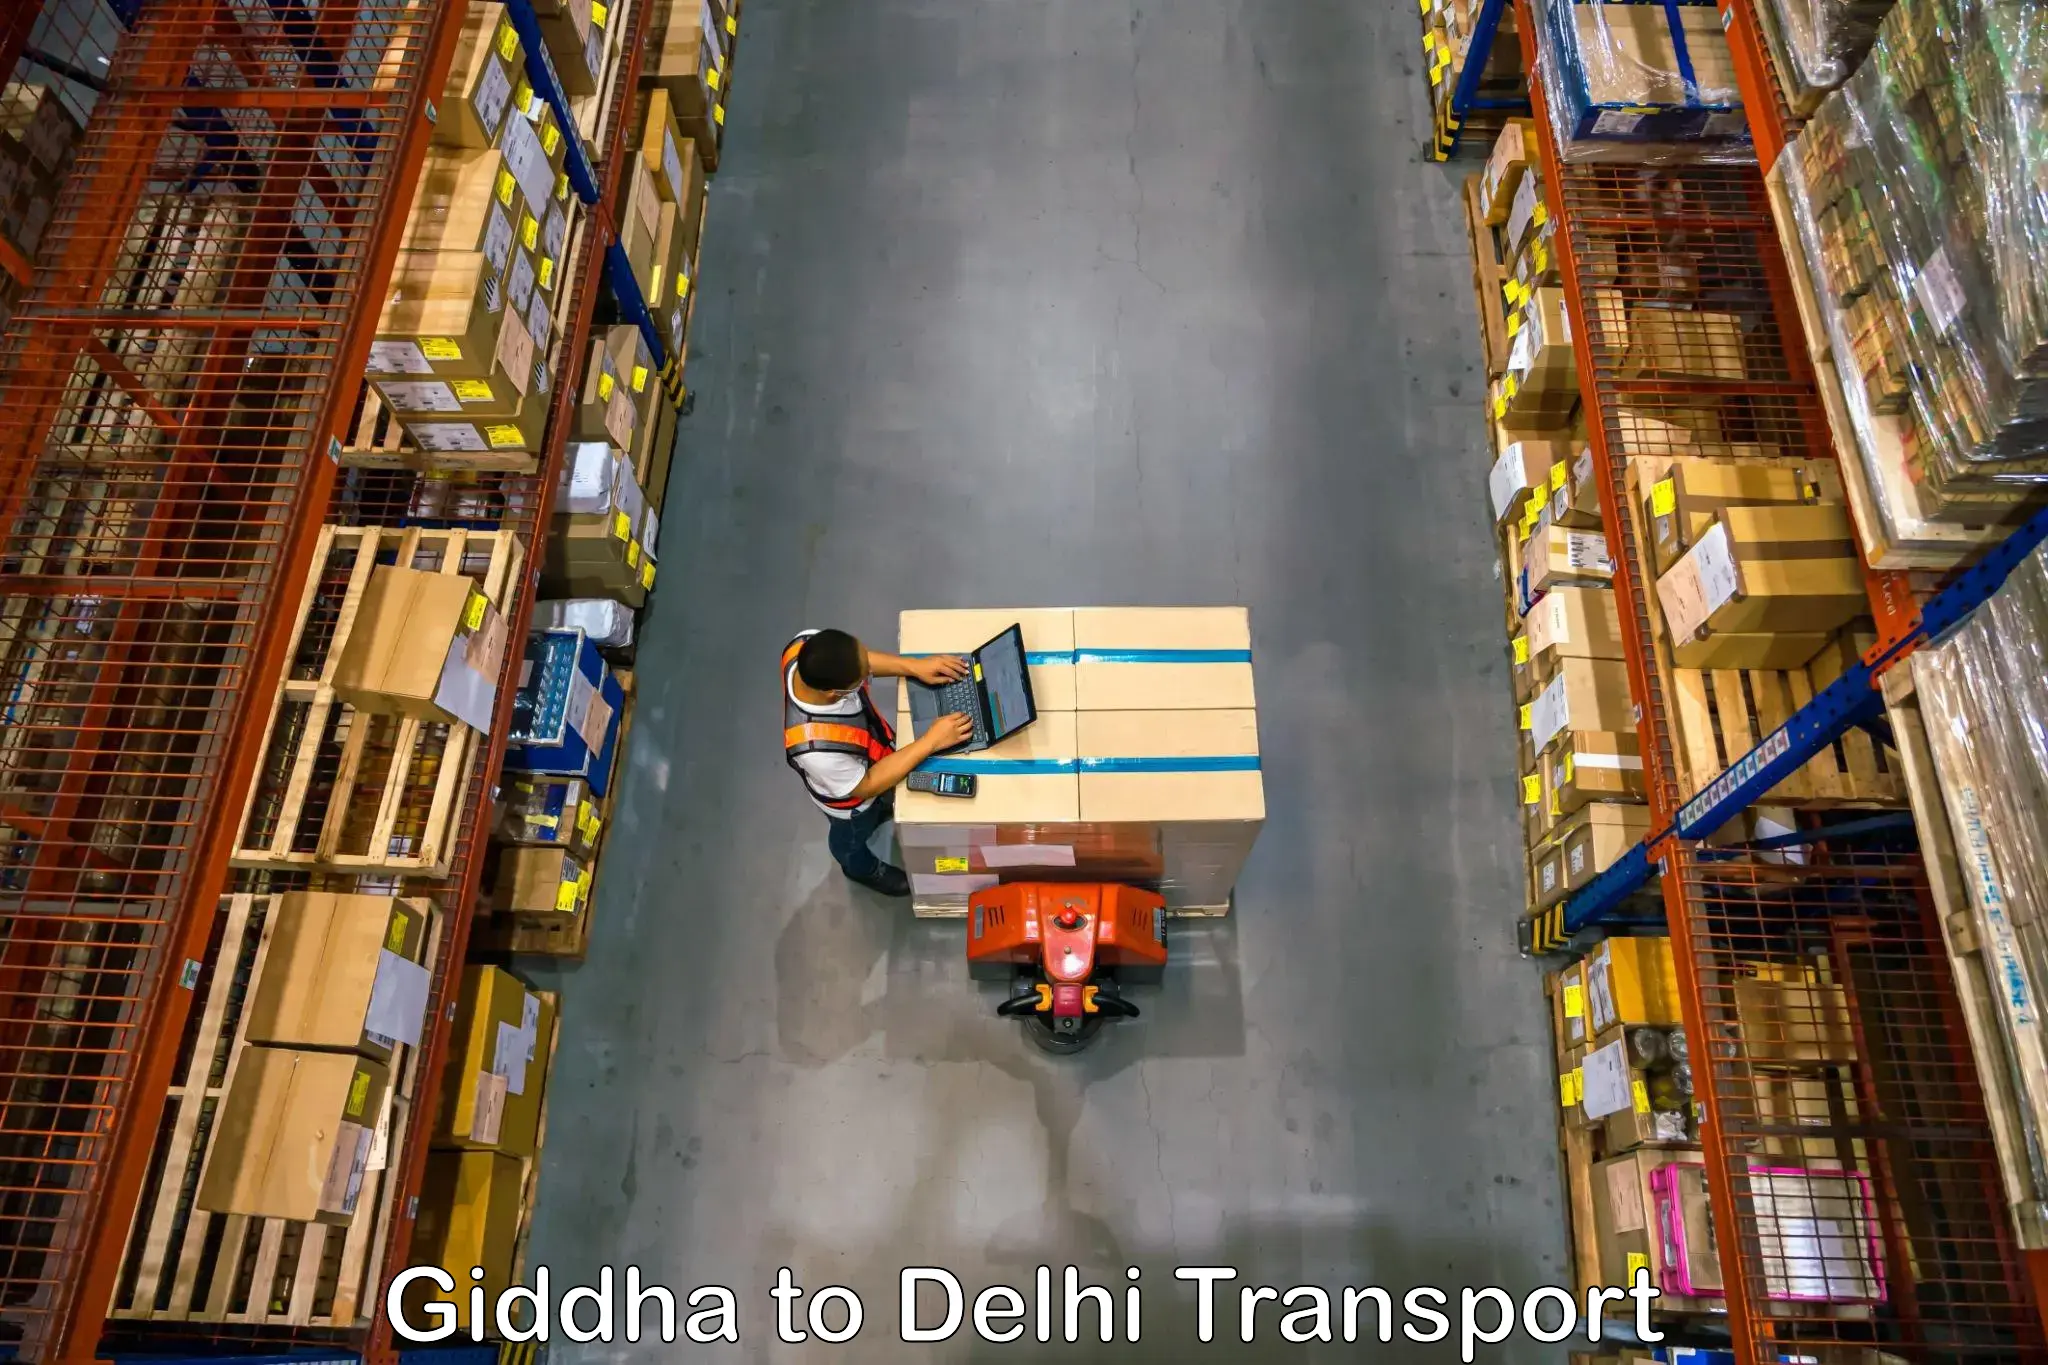 Container transport service Giddha to University of Delhi